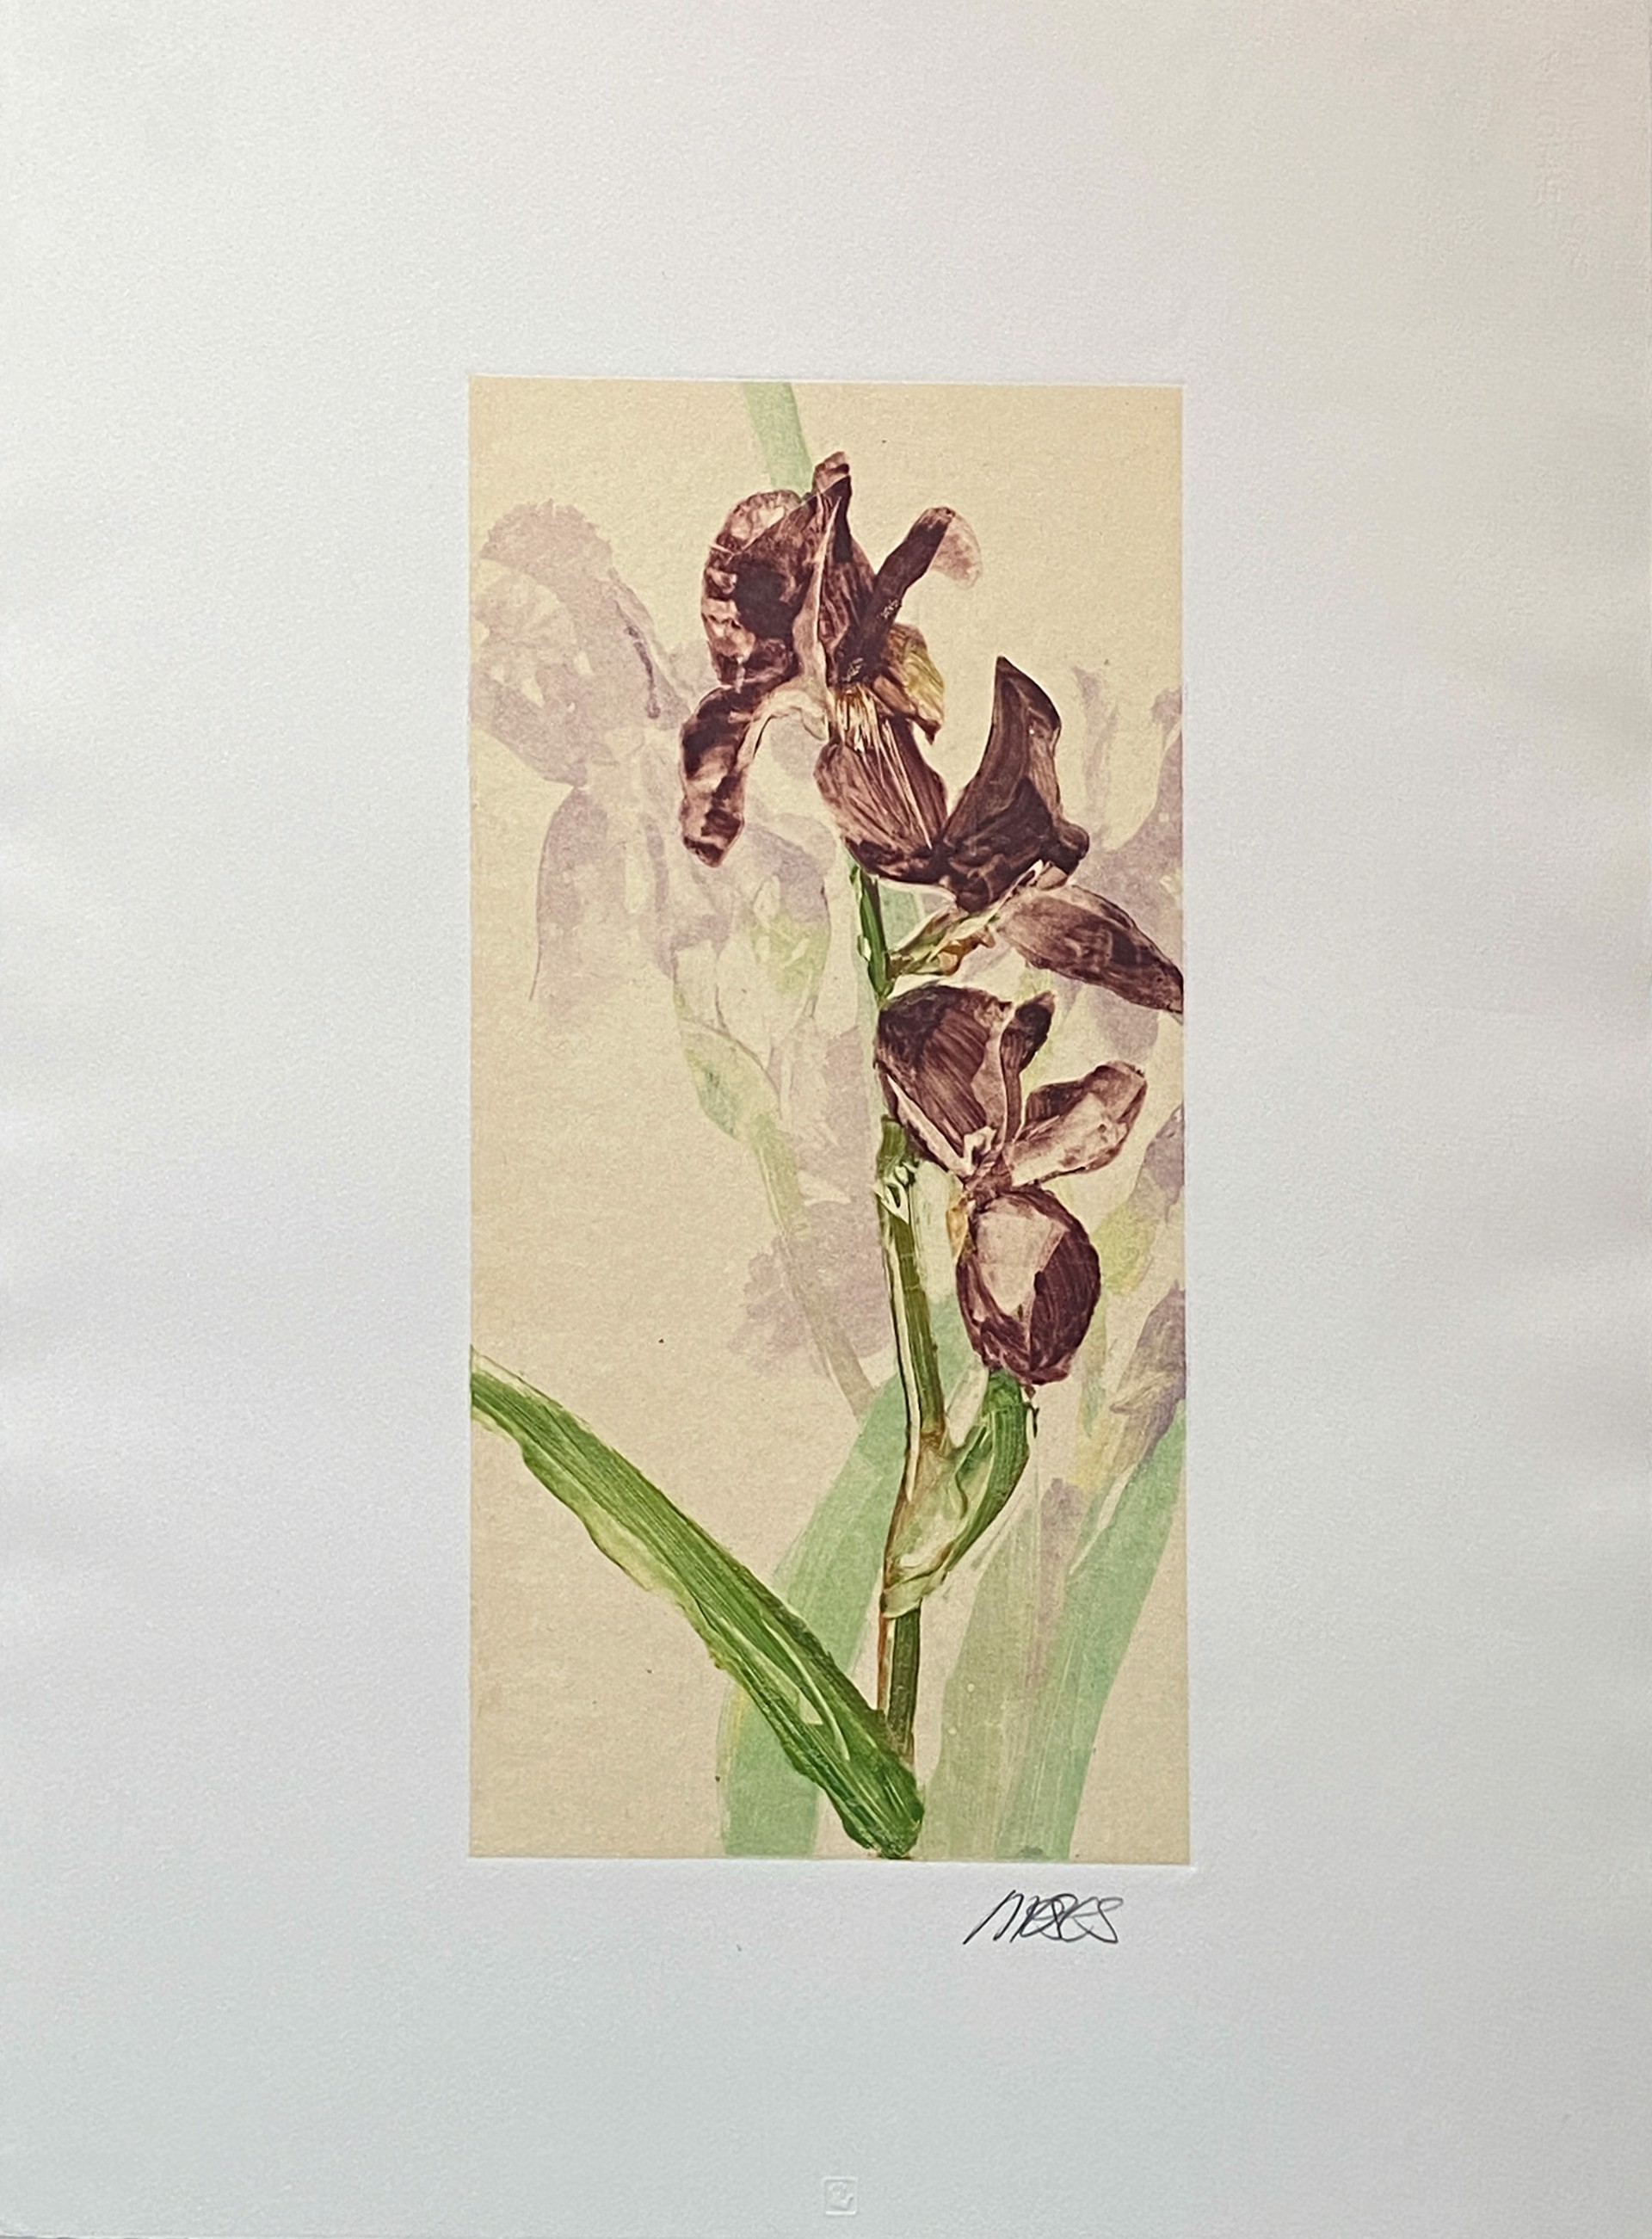 Untitled Iris by Forrest Moses